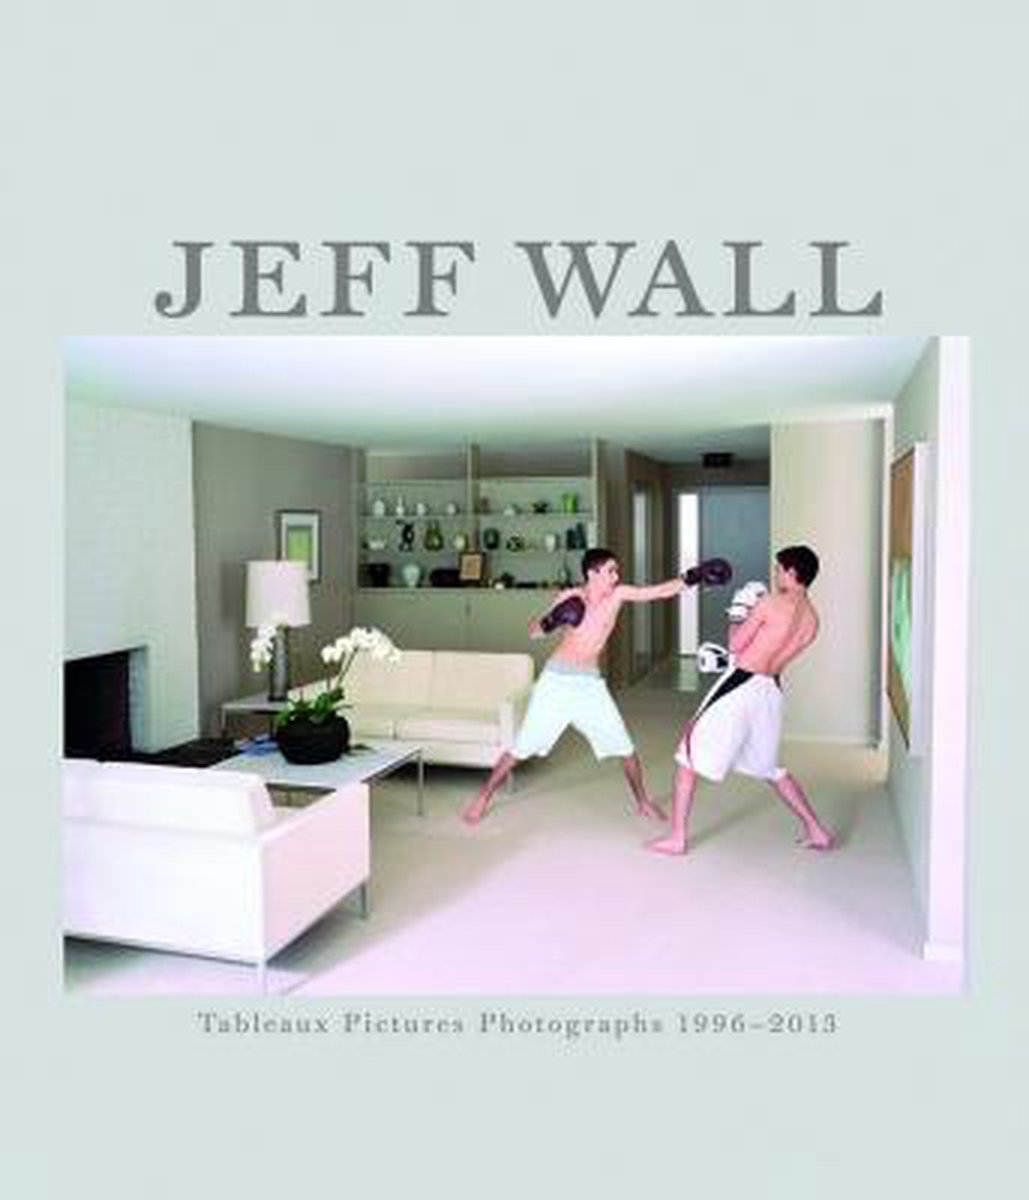 Jeff Wall: Tableaux Pictures Photographs